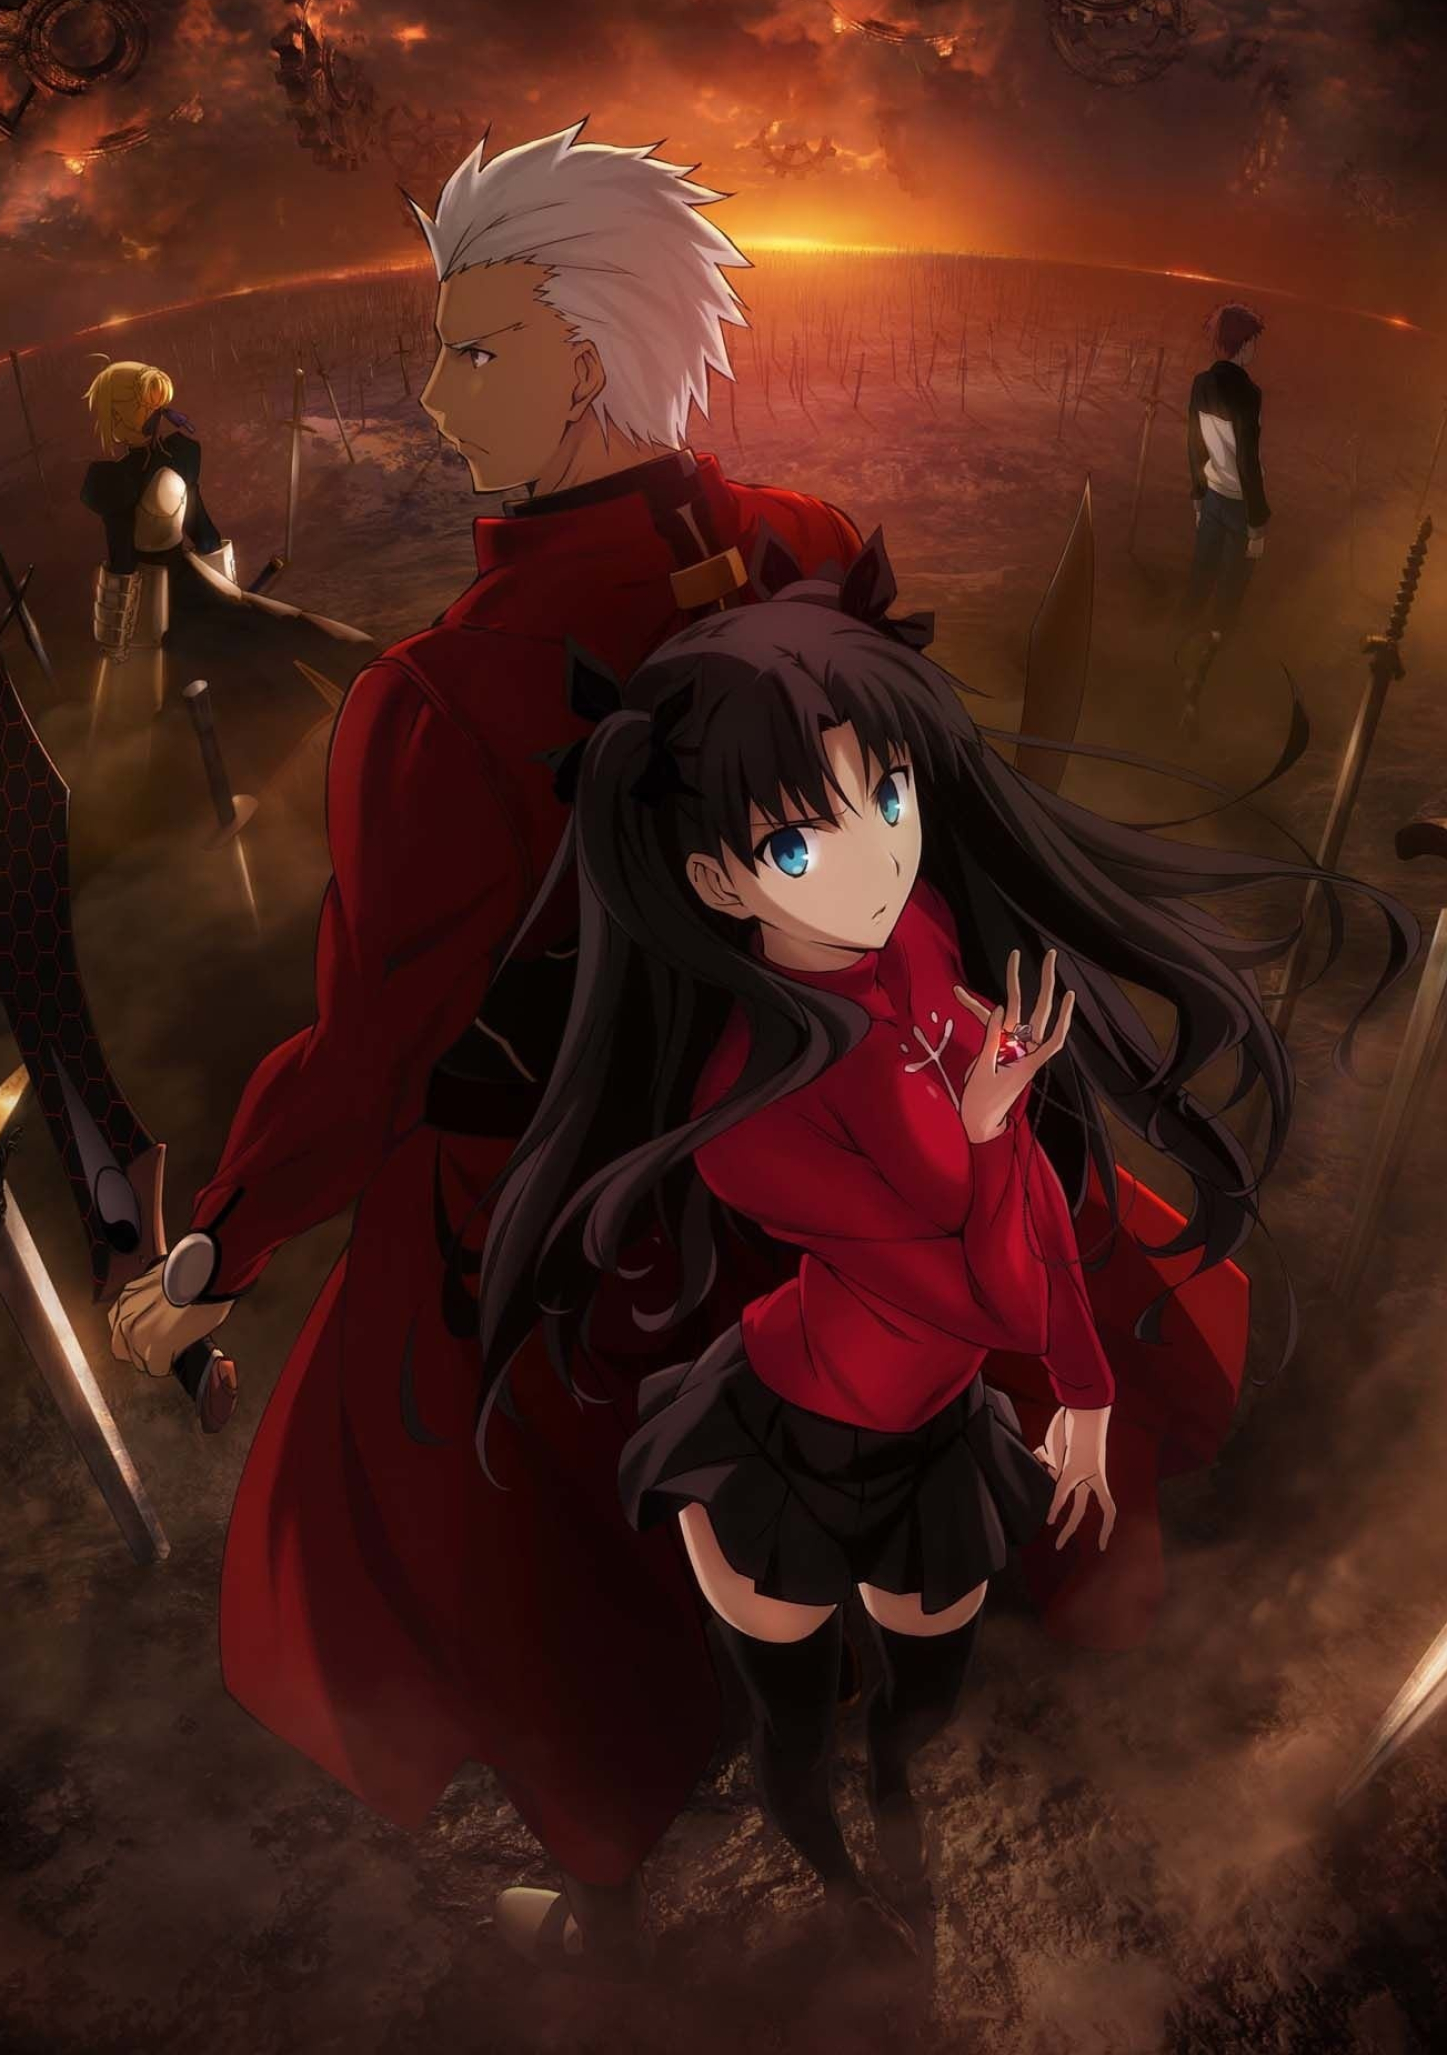 Fate/stay night, Anime news network, Unlimited Blade Works, Latest updates, 1450x2060 HD Handy